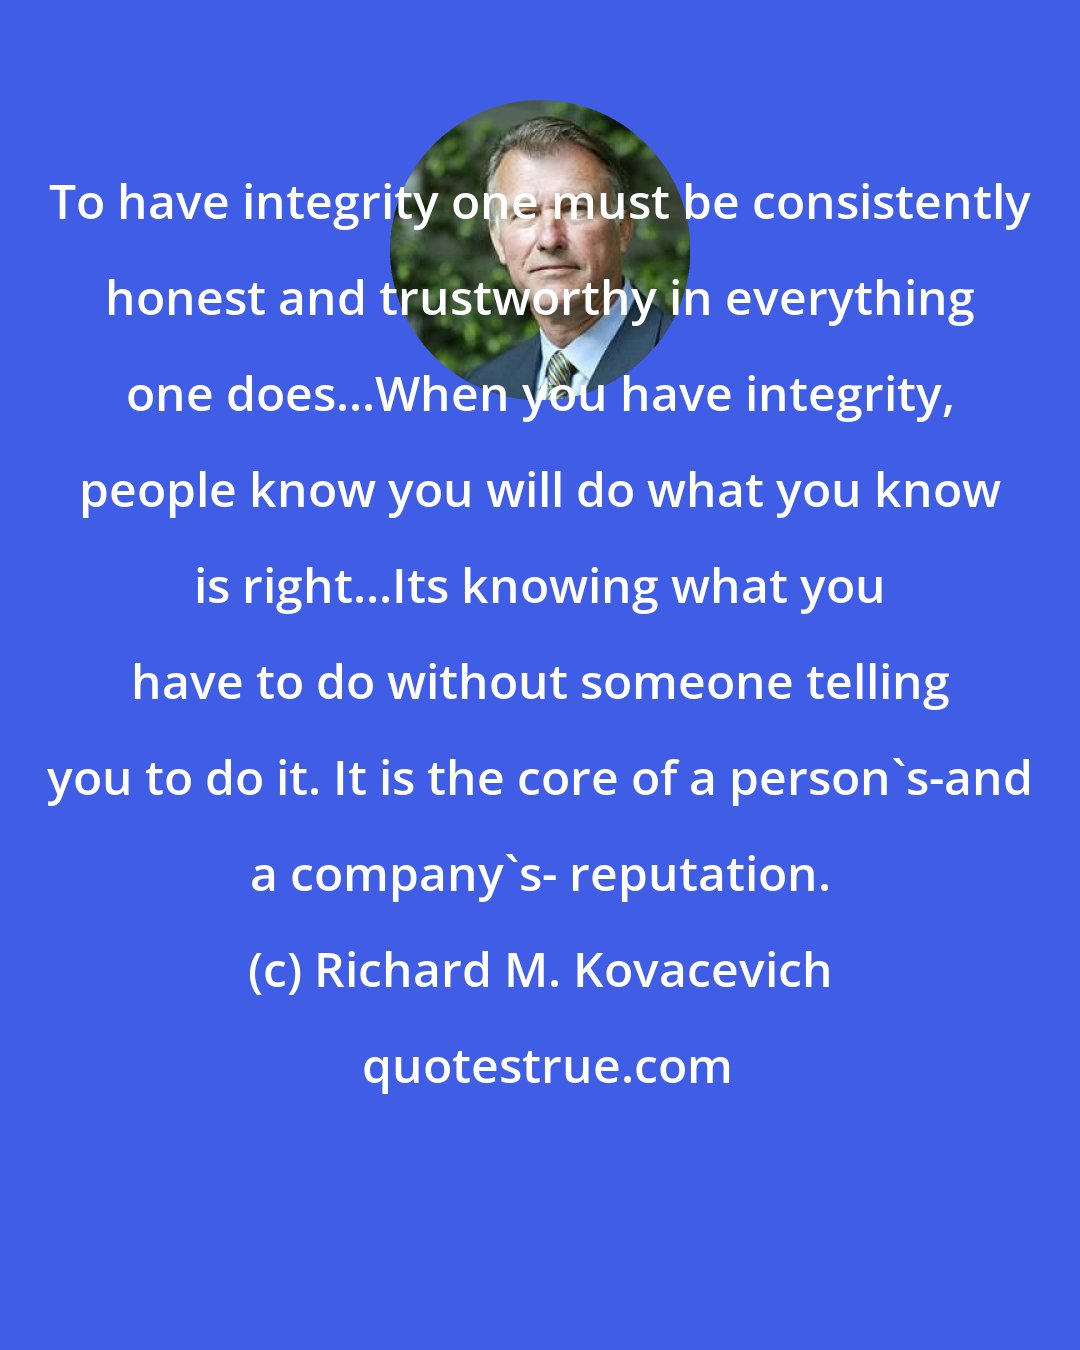 Richard M. Kovacevich: To have integrity one must be consistently honest and trustworthy in everything one does...When you have integrity, people know you will do what you know is right...Its knowing what you have to do without someone telling you to do it. It is the core of a person's-and a company's- reputation.